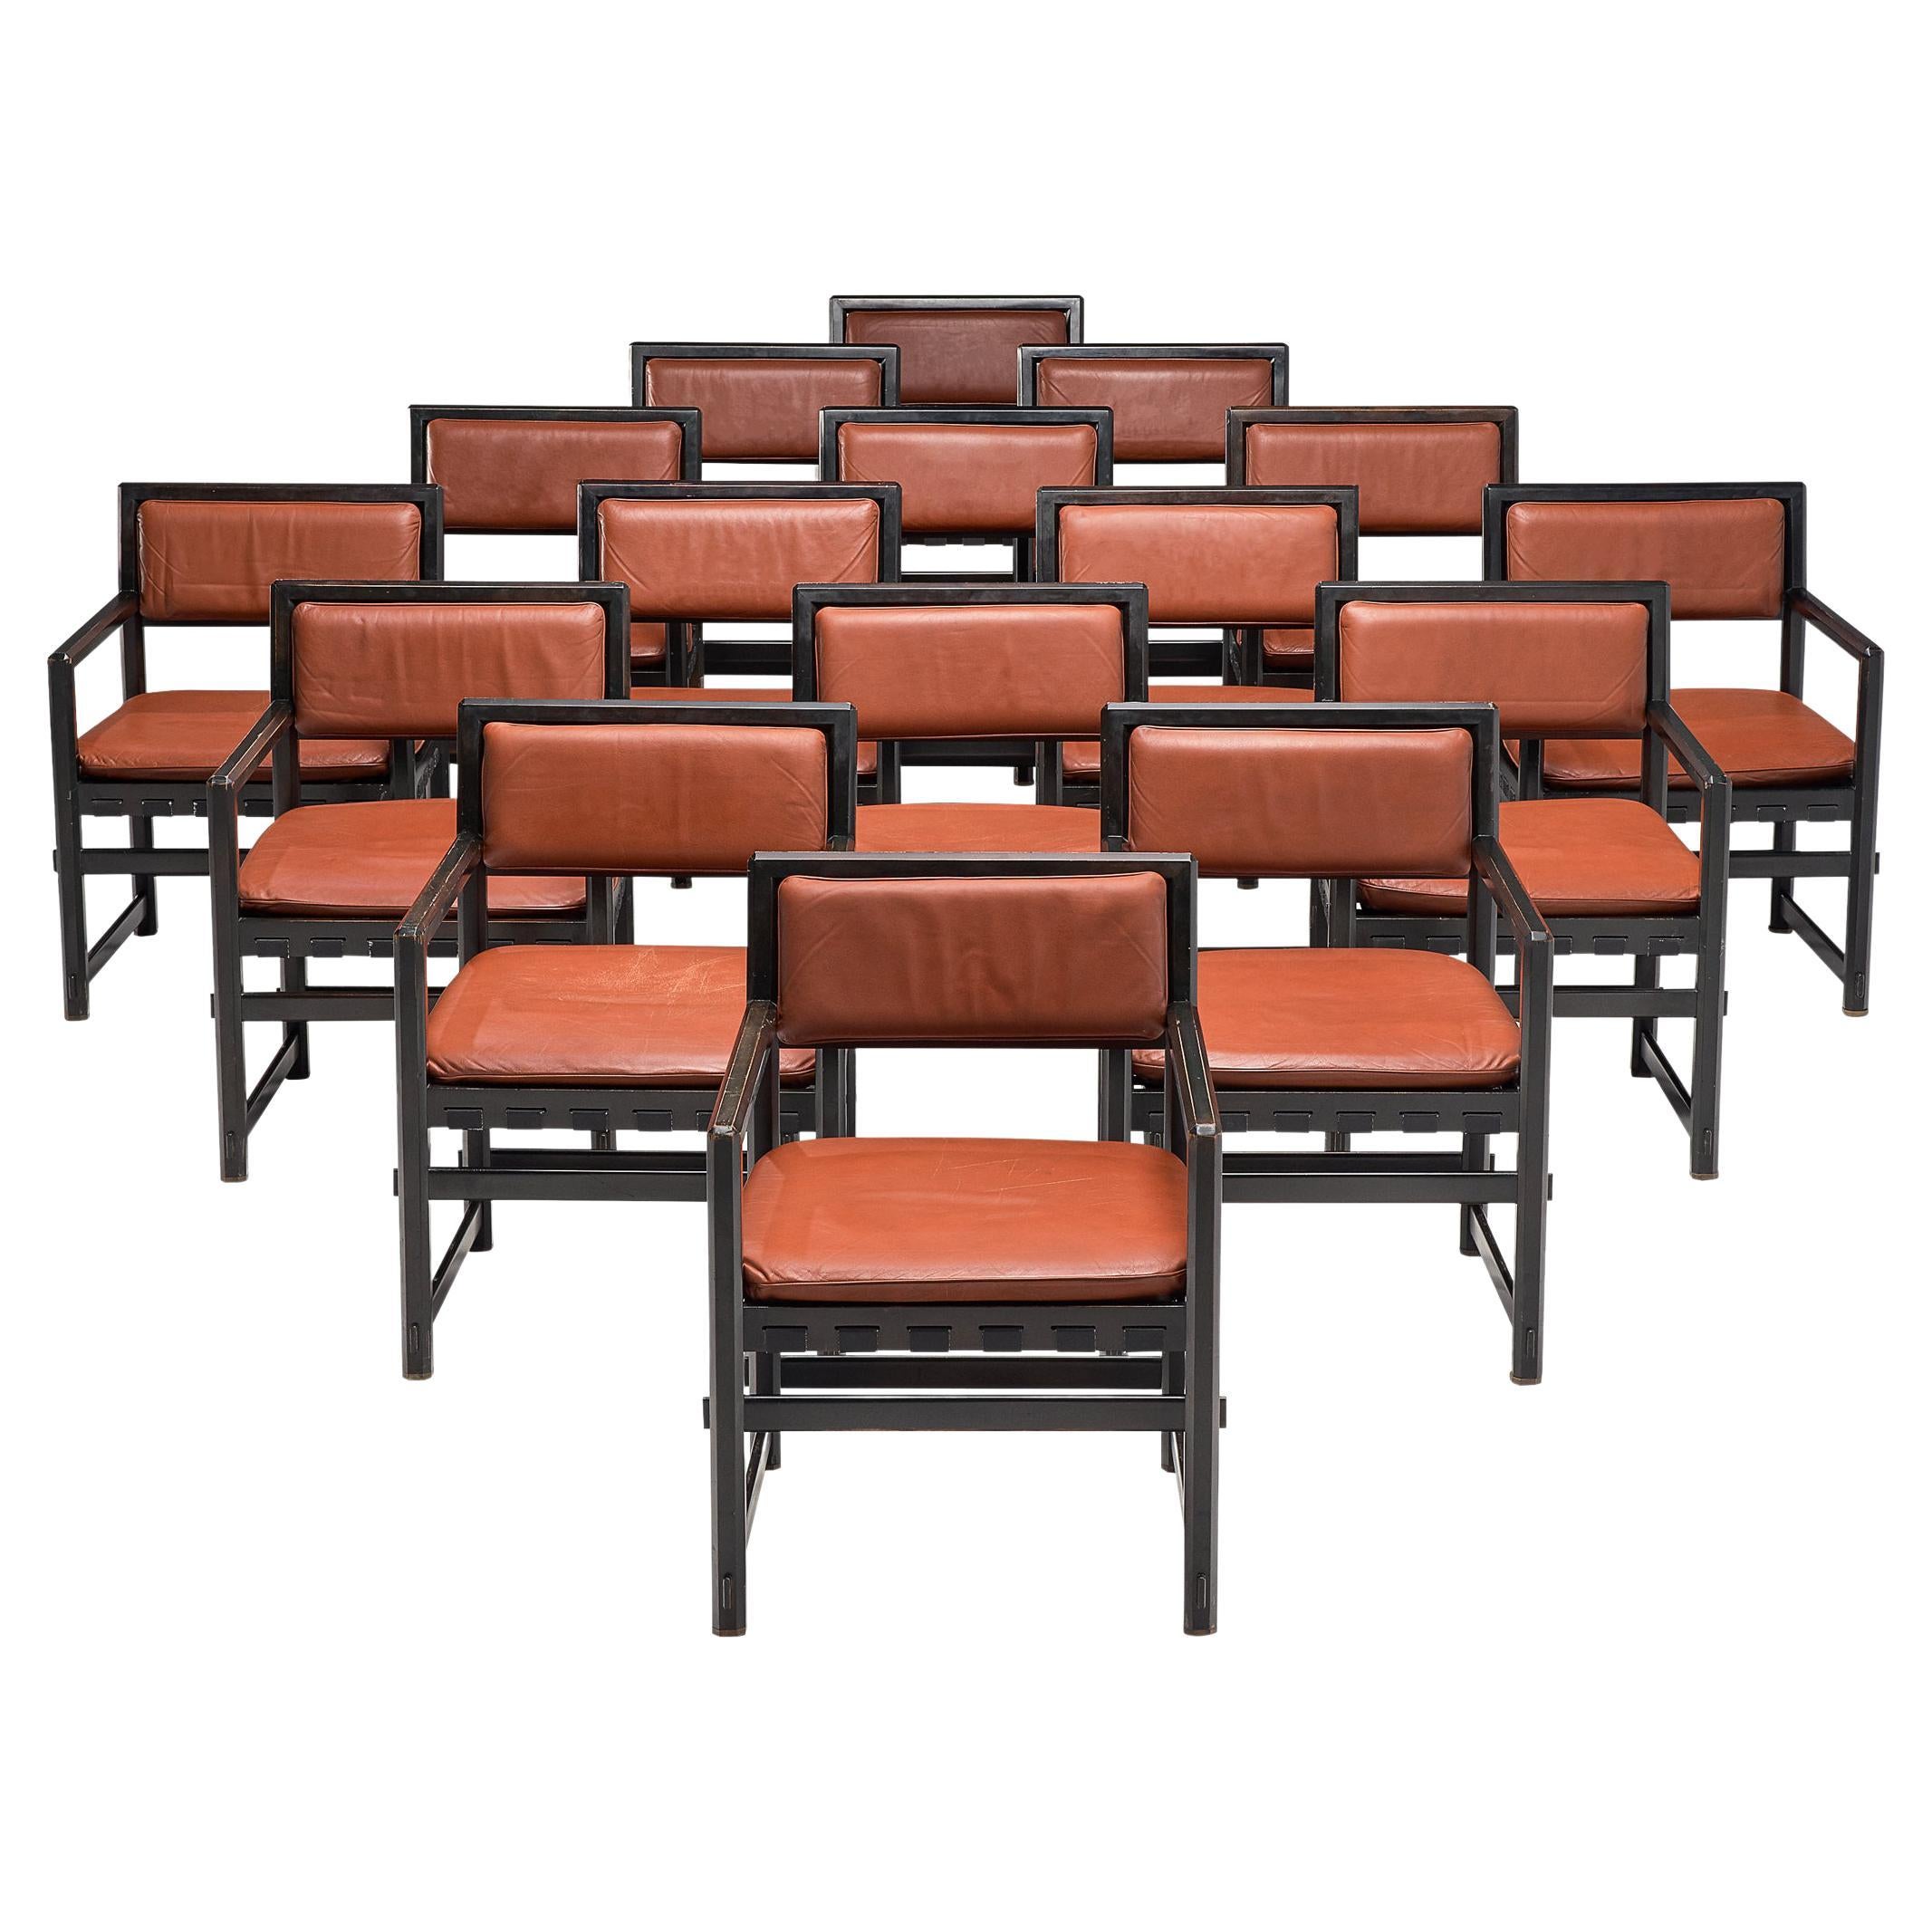 Edward Wormley Large Set of Sixteen Dining Chairs in Red Leather